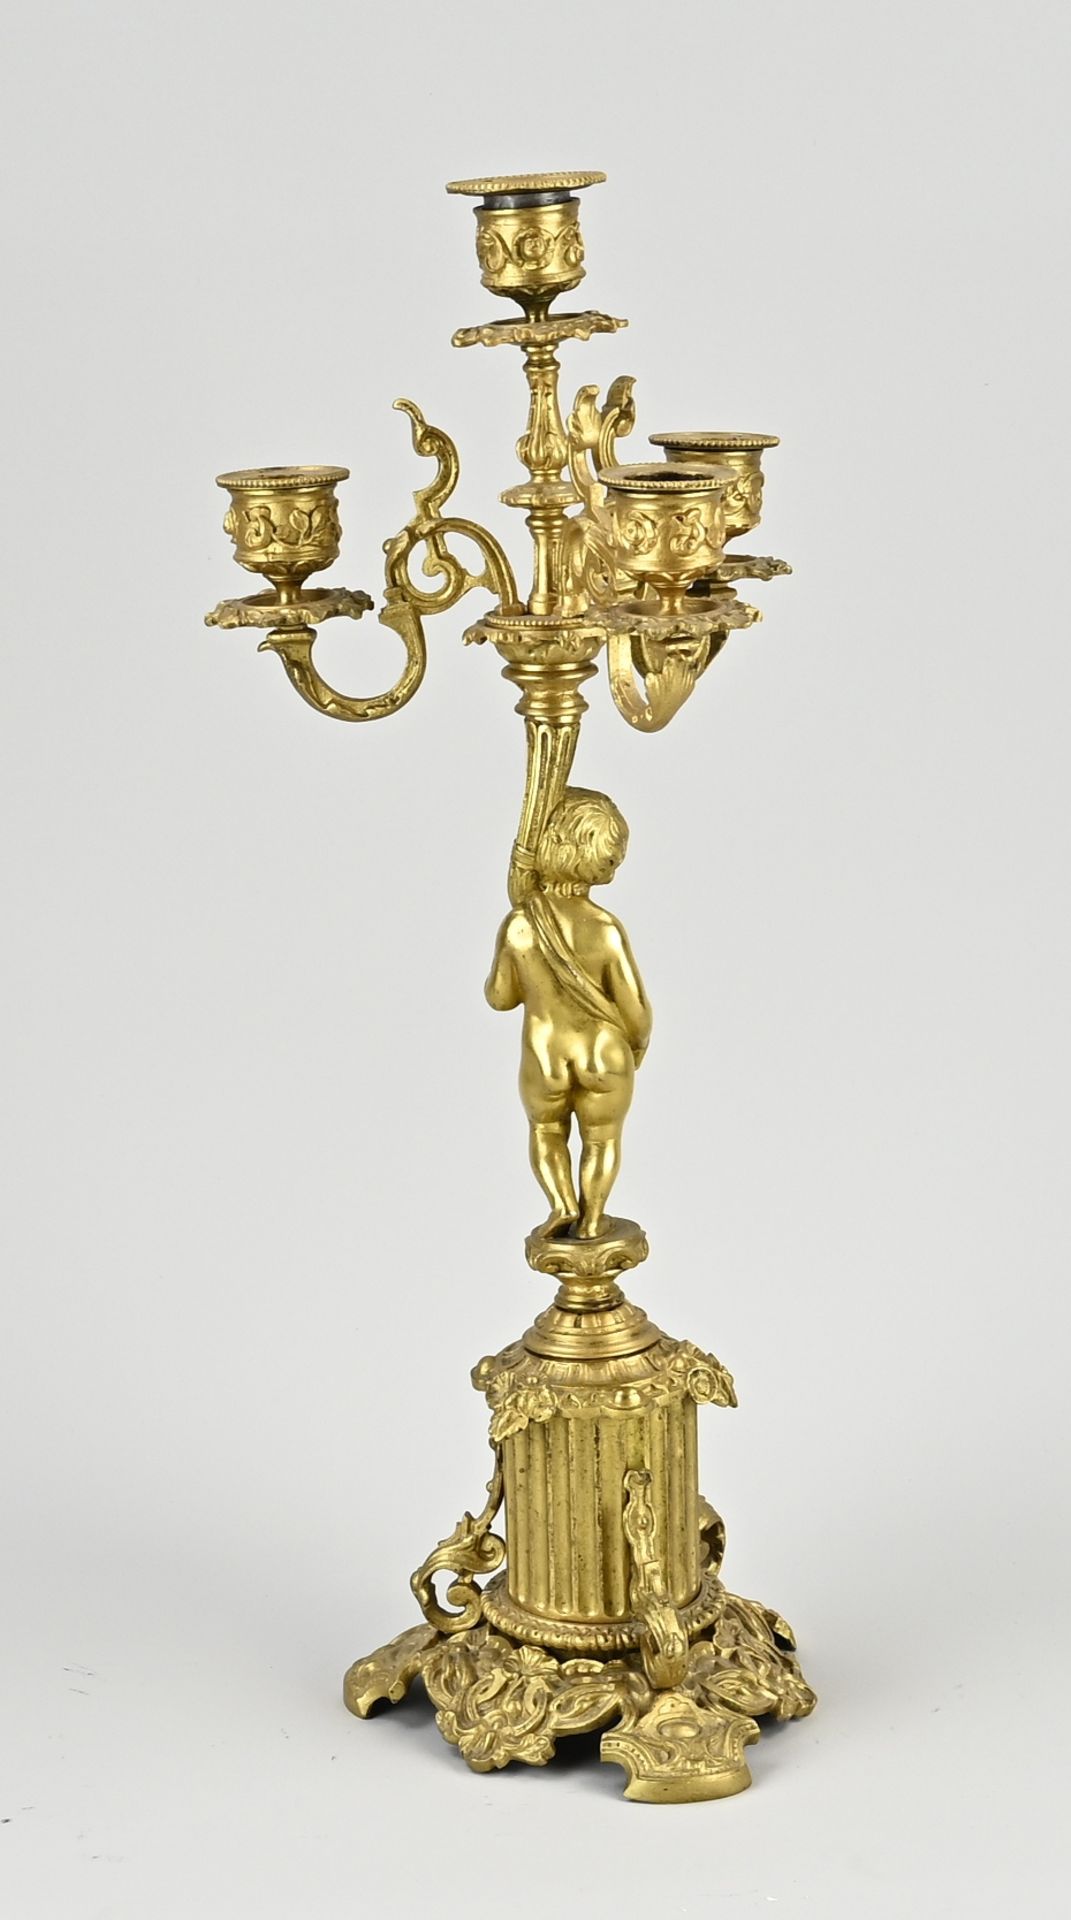 Antique French Charles Dix candlestick, 1840 - Image 2 of 2